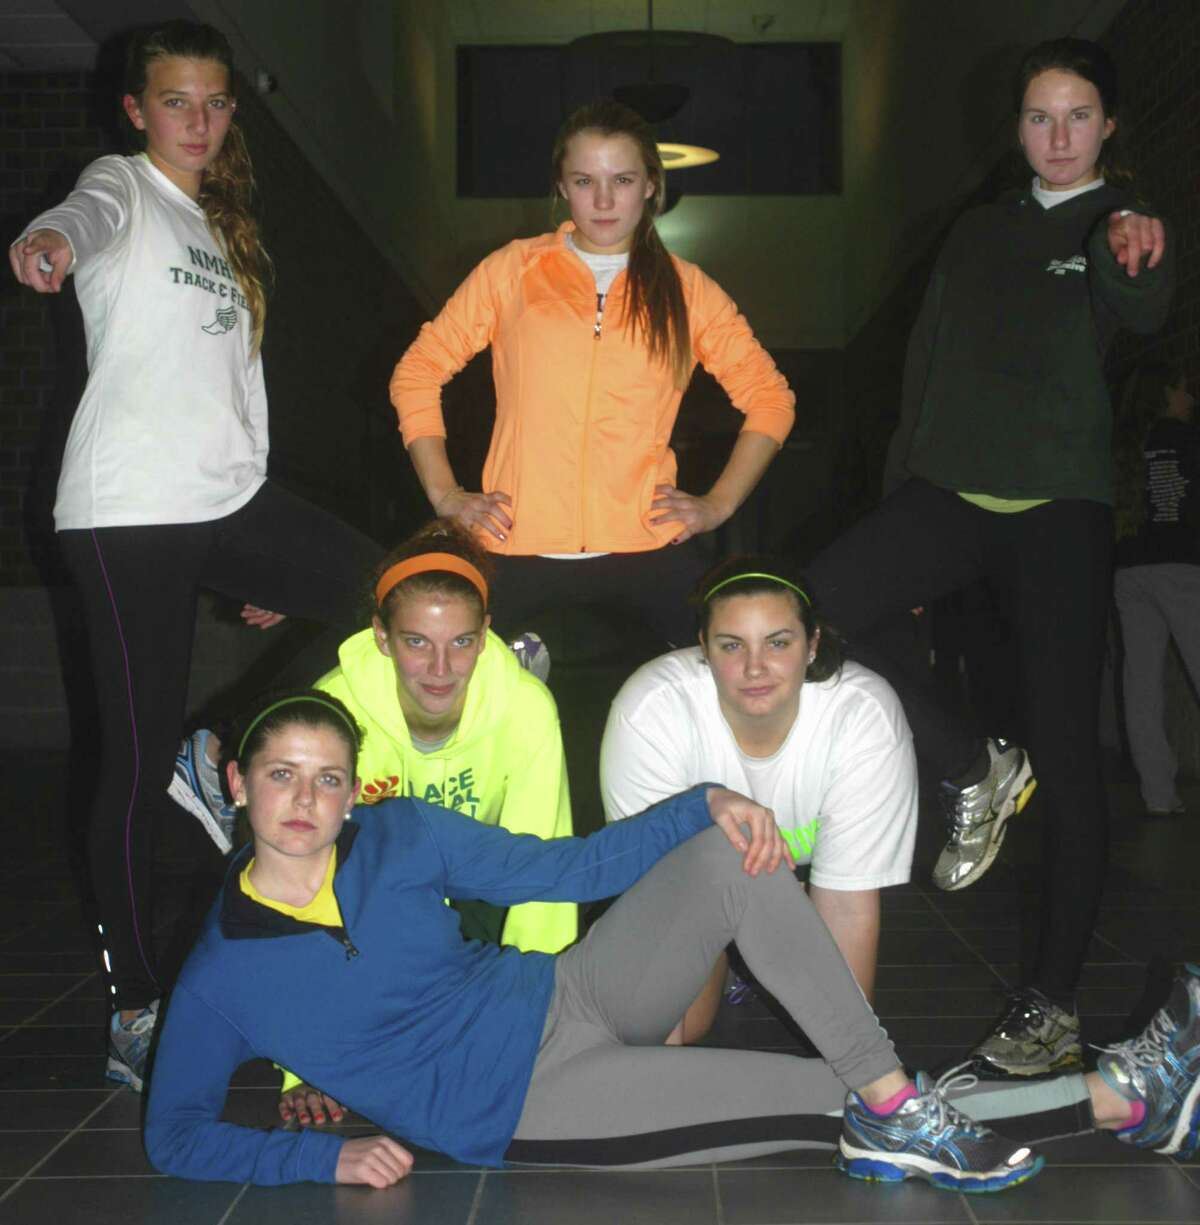 Green Wave captains Meghan Dietter, foreground; from left to right, Ali Rettenmeier and Susie Baldwick, and, back row, Sierra Grazia, Claire Brofford and Kayla Nelson show attitude as they pose for posterity in advance of the New Milford High School girls' indoor track season. Absent from the photo is fellow captain Sofia Amaral.. December 2012